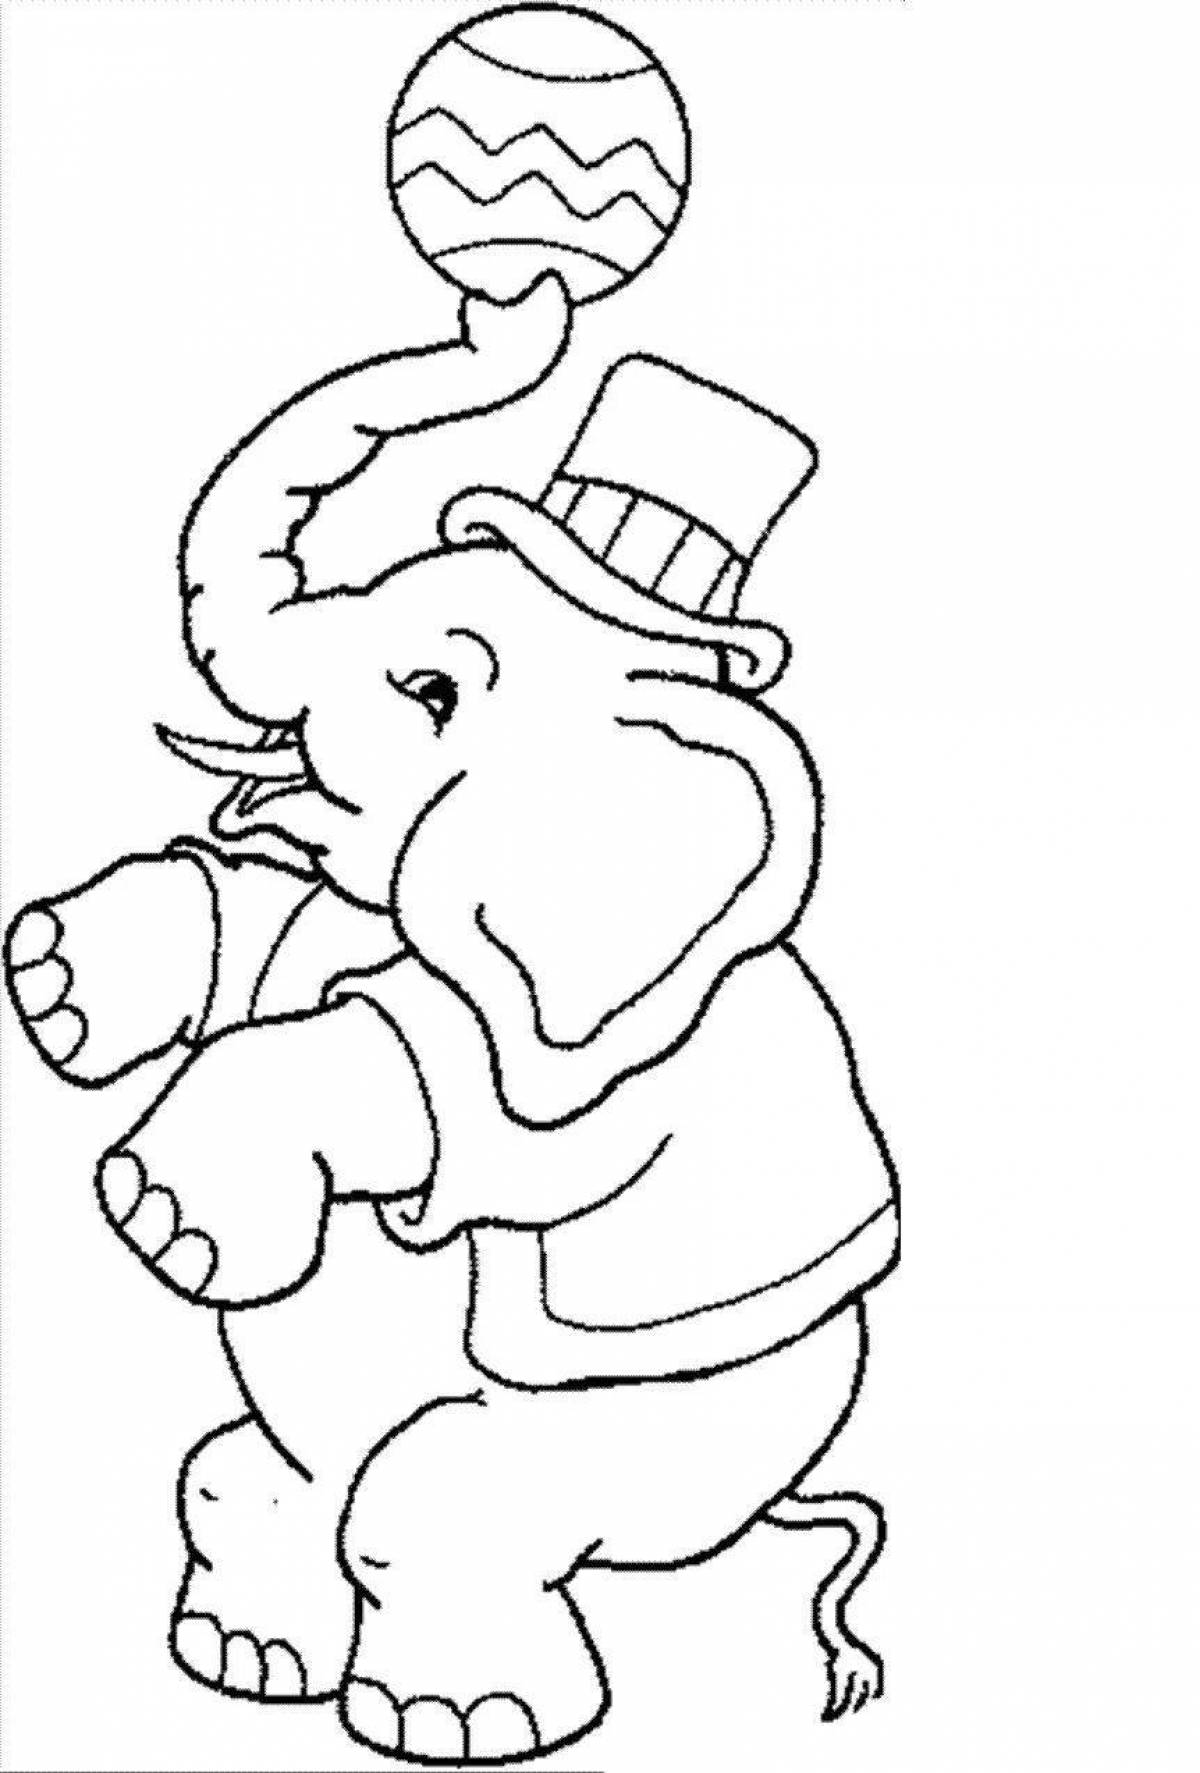 Animated circus elephant coloring page